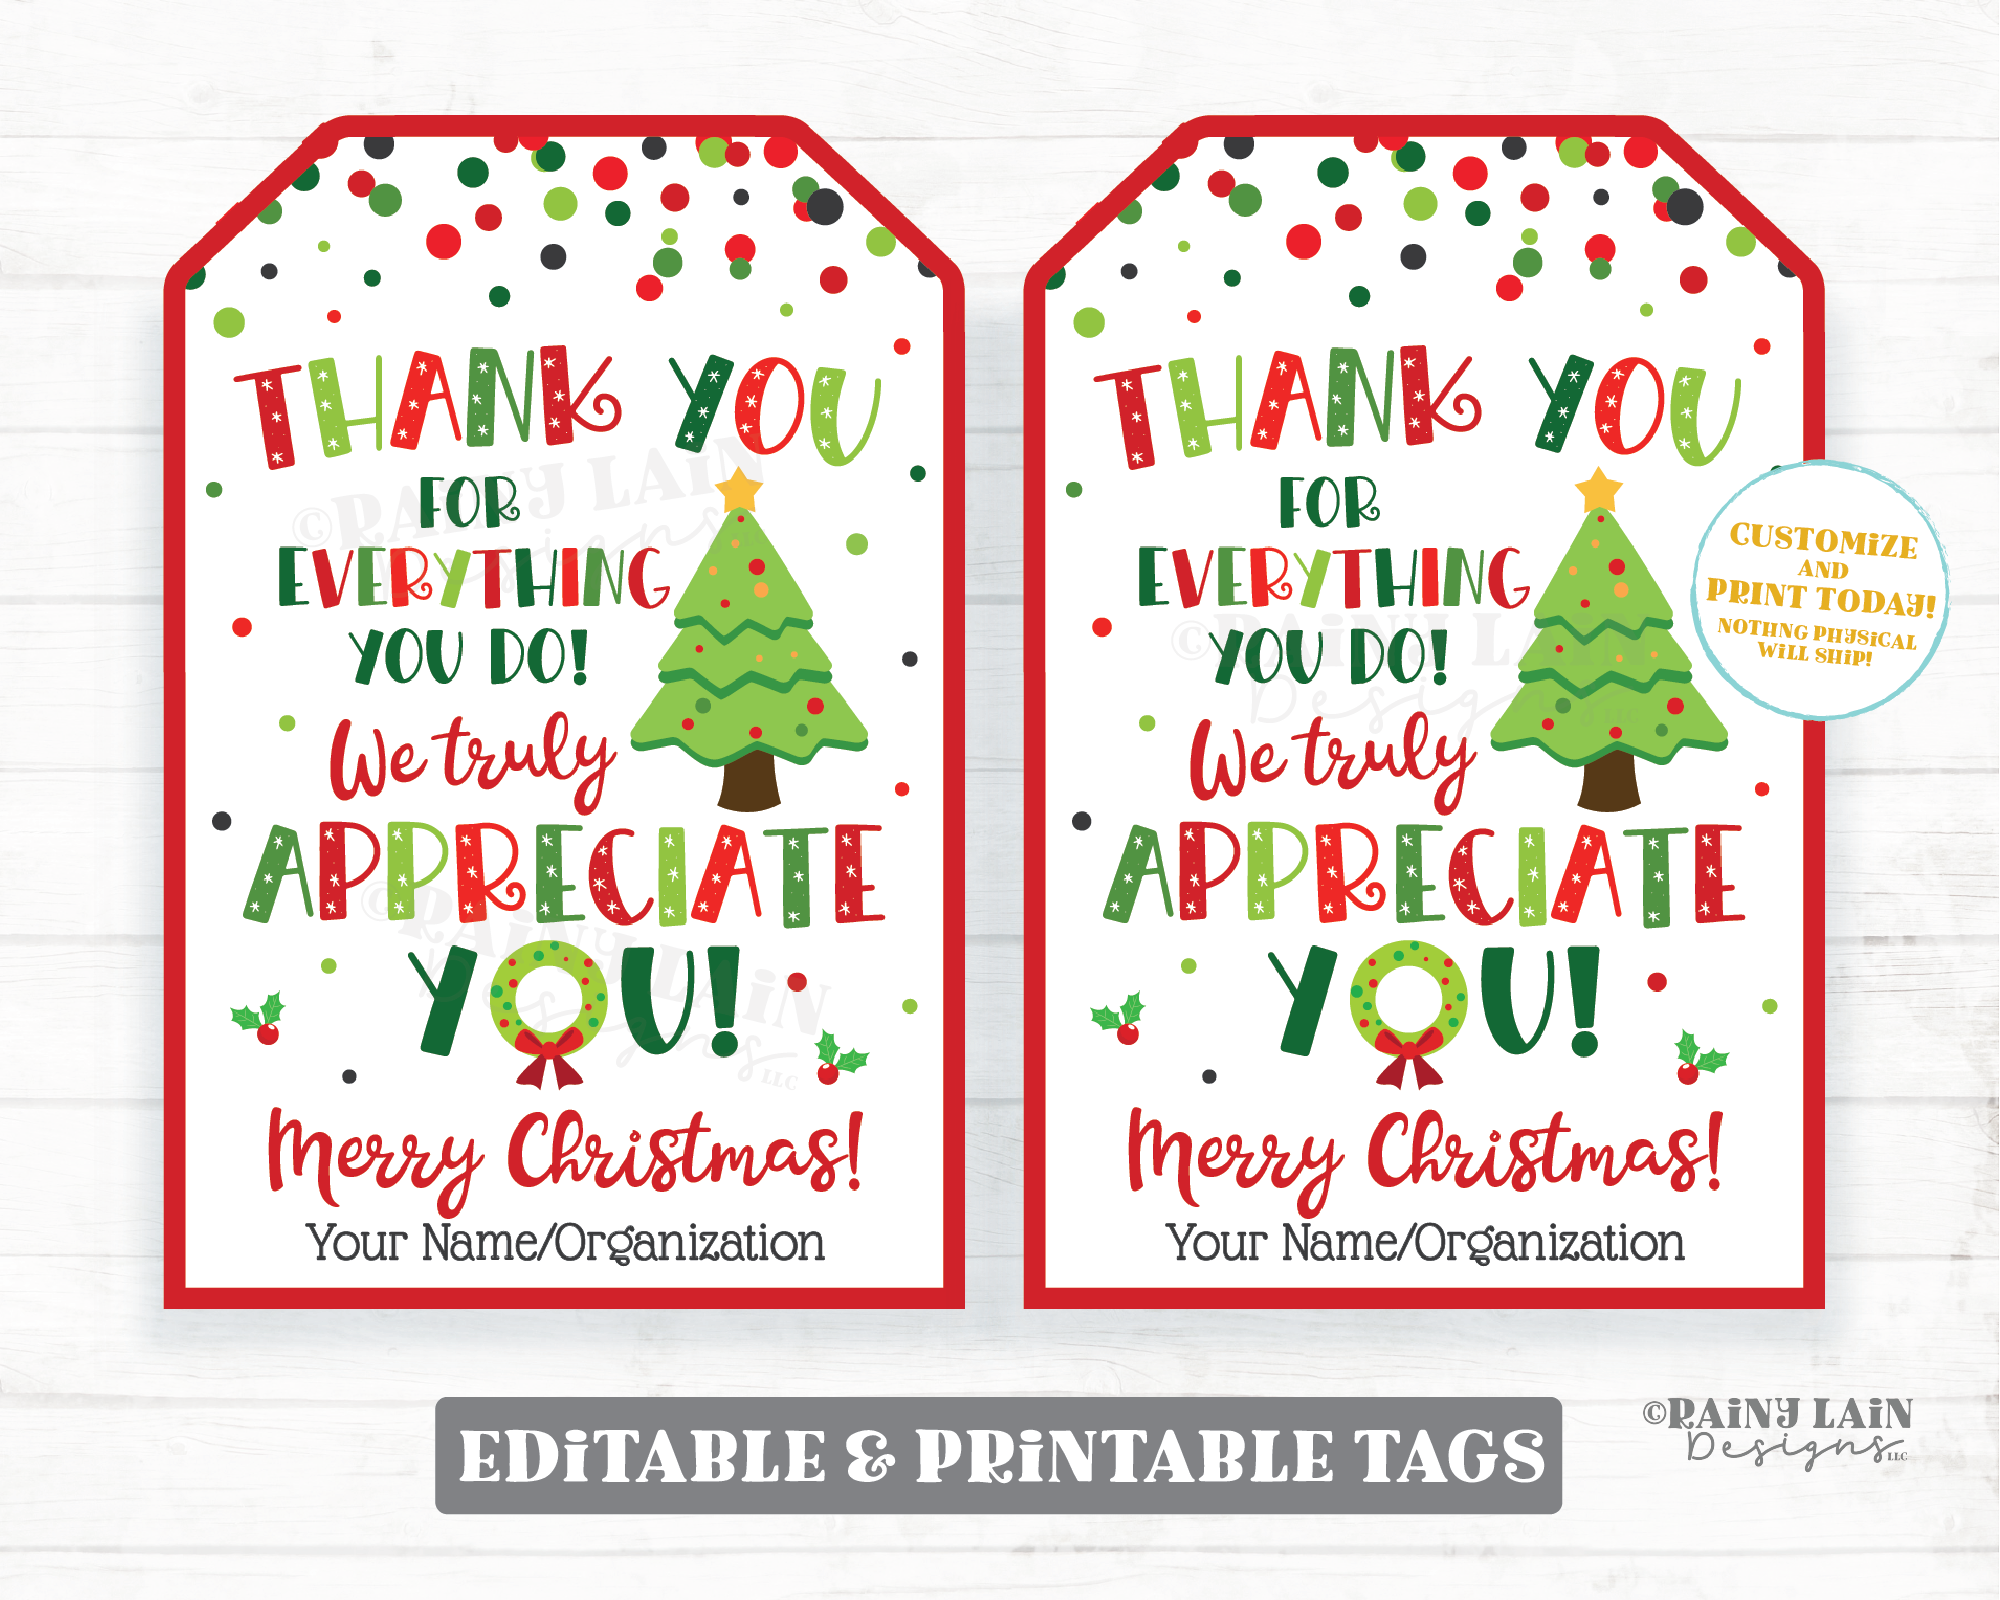 Thank you for all you do Christmas tag Appreciate Holiday Gift Tags  Christmas Appreciation Favor Tags Teacher Staff Employee School